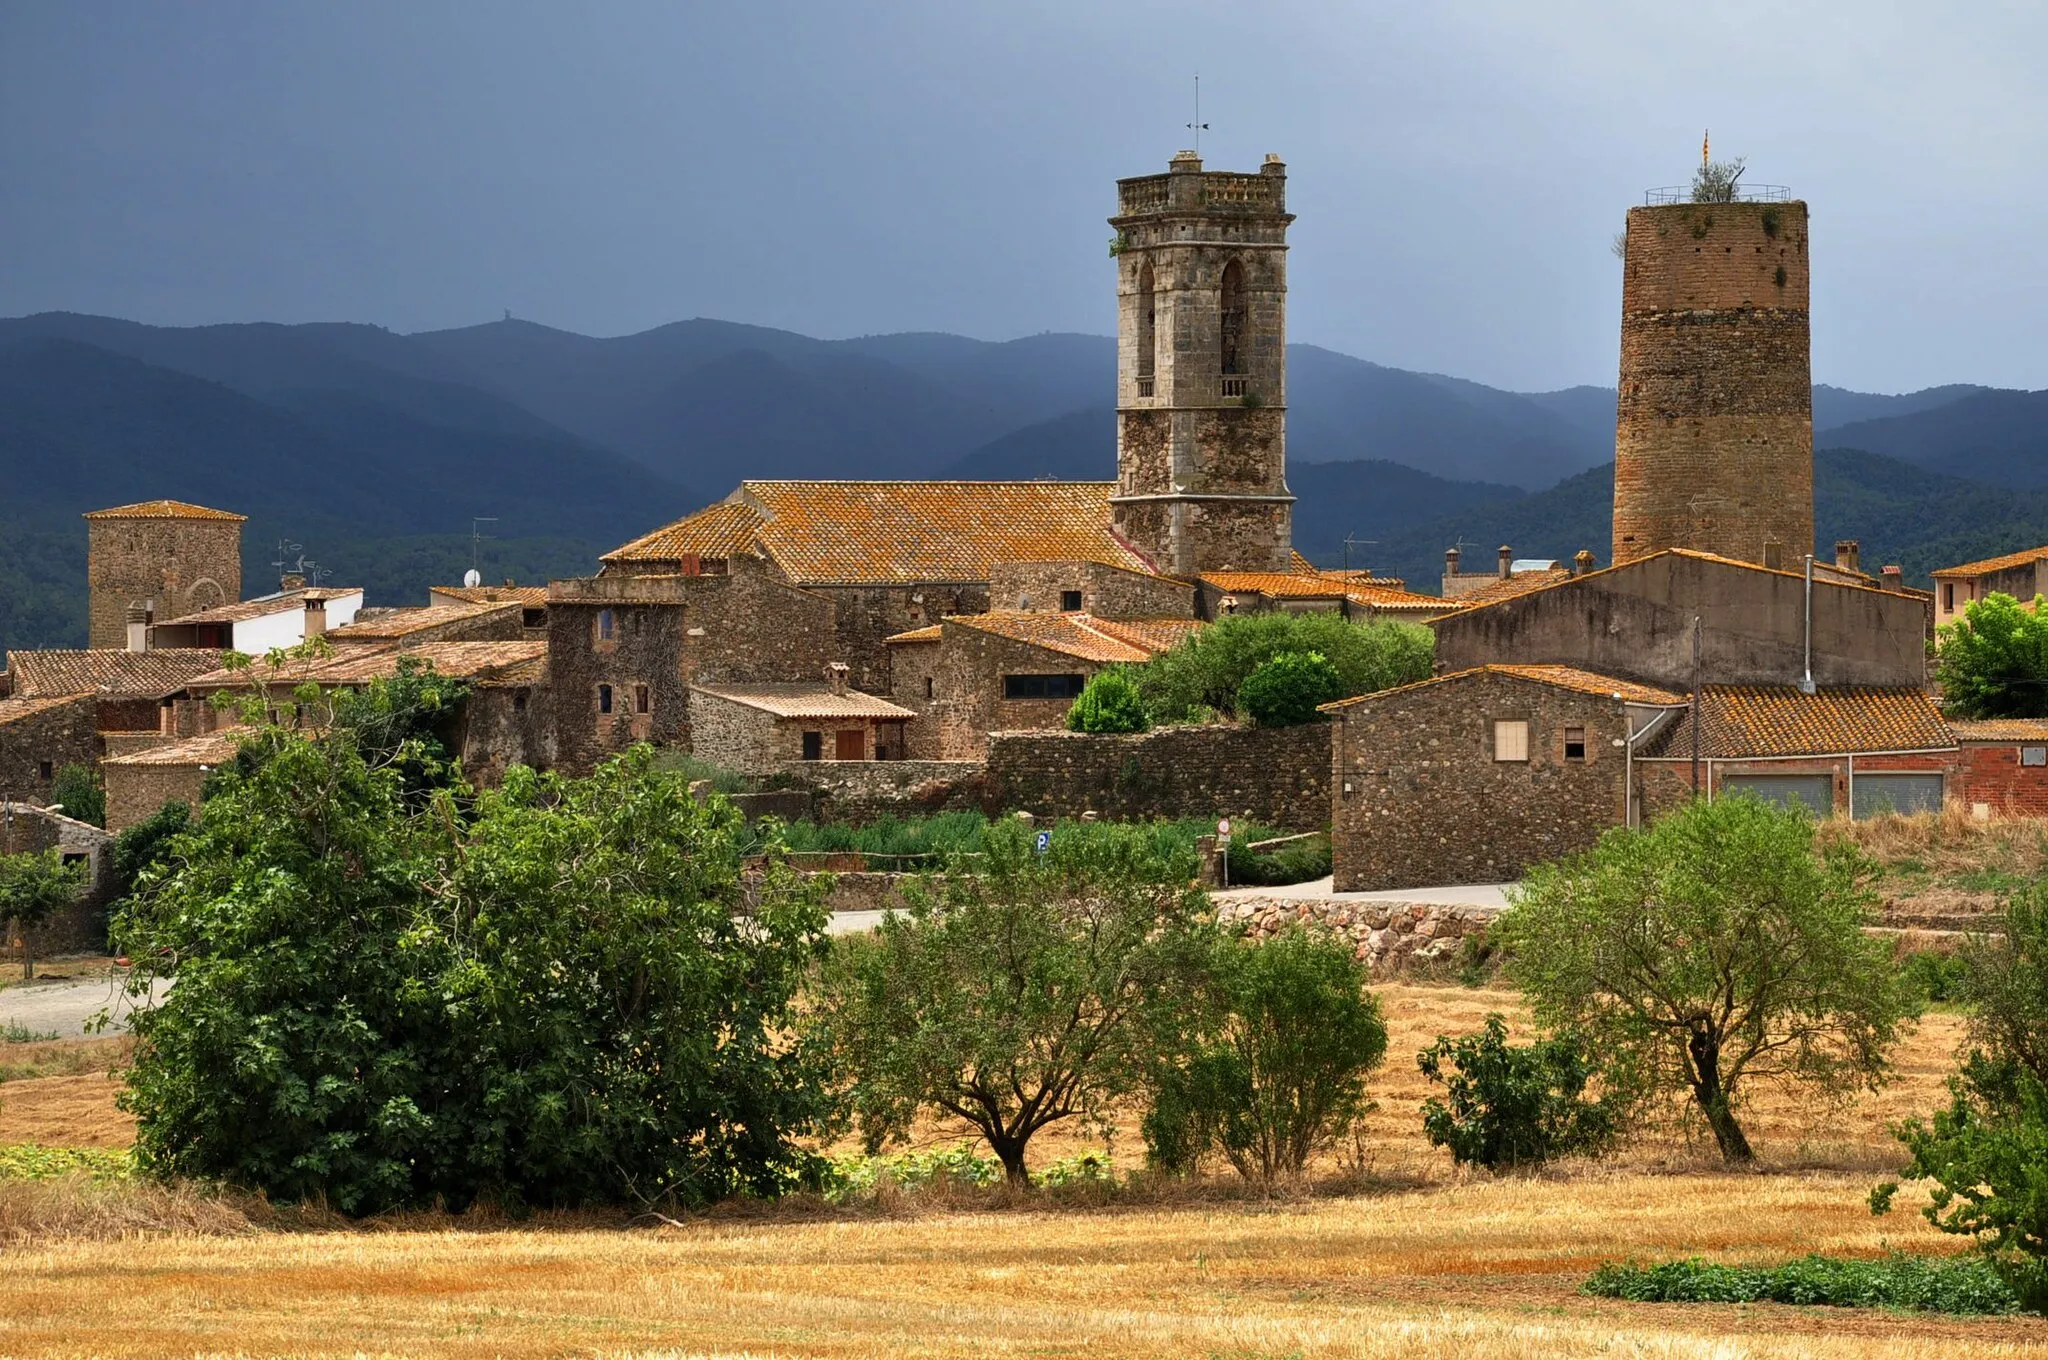 Photo showing: The village of Cruïlles (County of Baix Empordà, Catalonia, Spain) lies 2 km west of La Bisbal d'Empordà. The hills in the background are Les Gavarres.